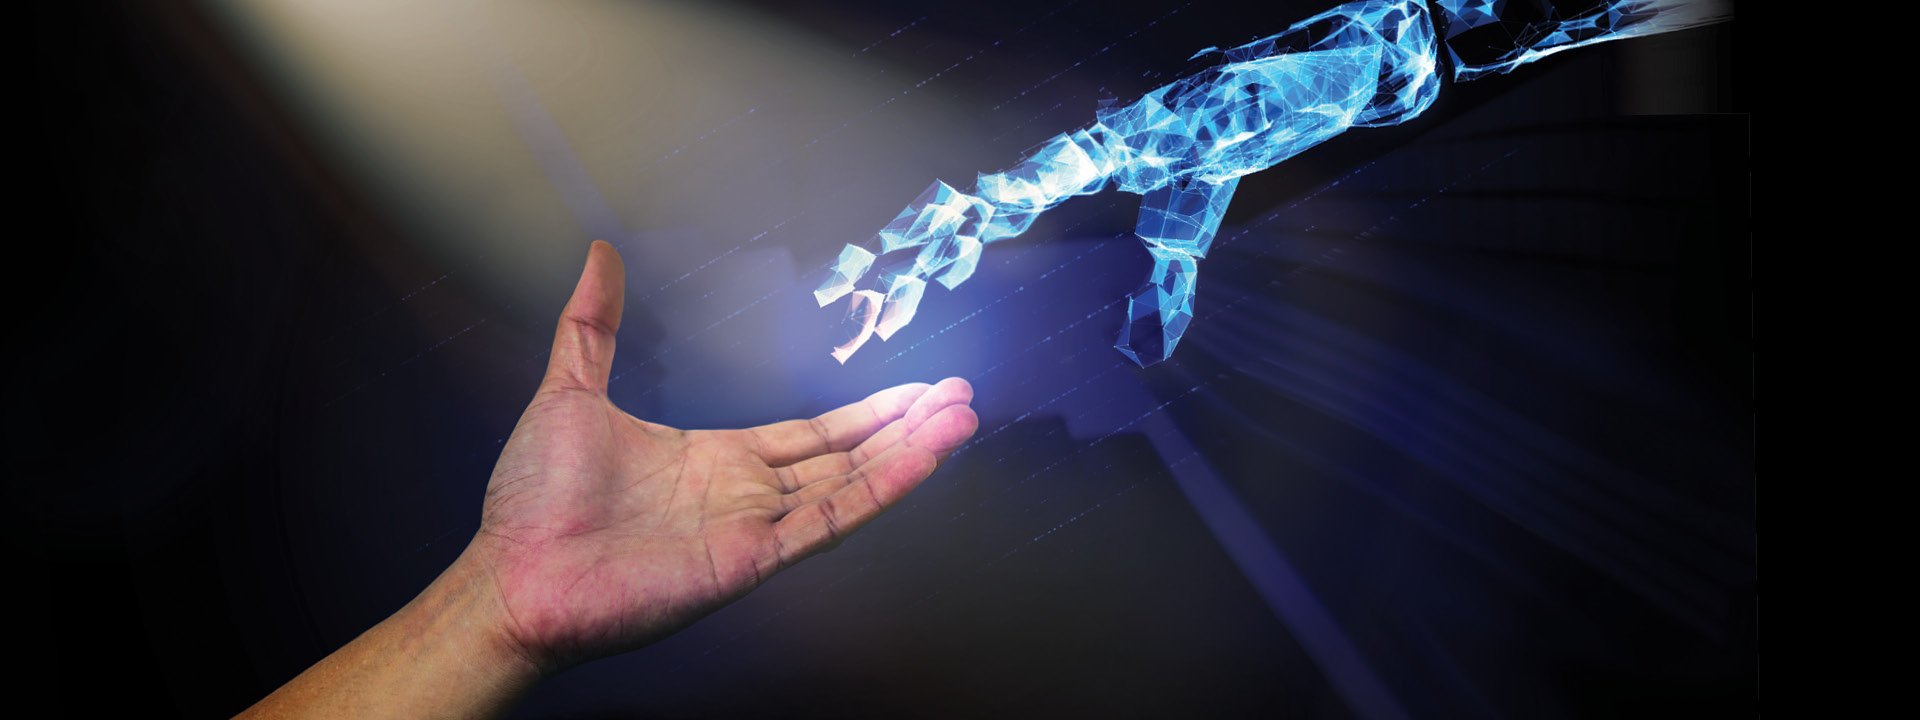 Human hand reaching out to a cyber hand